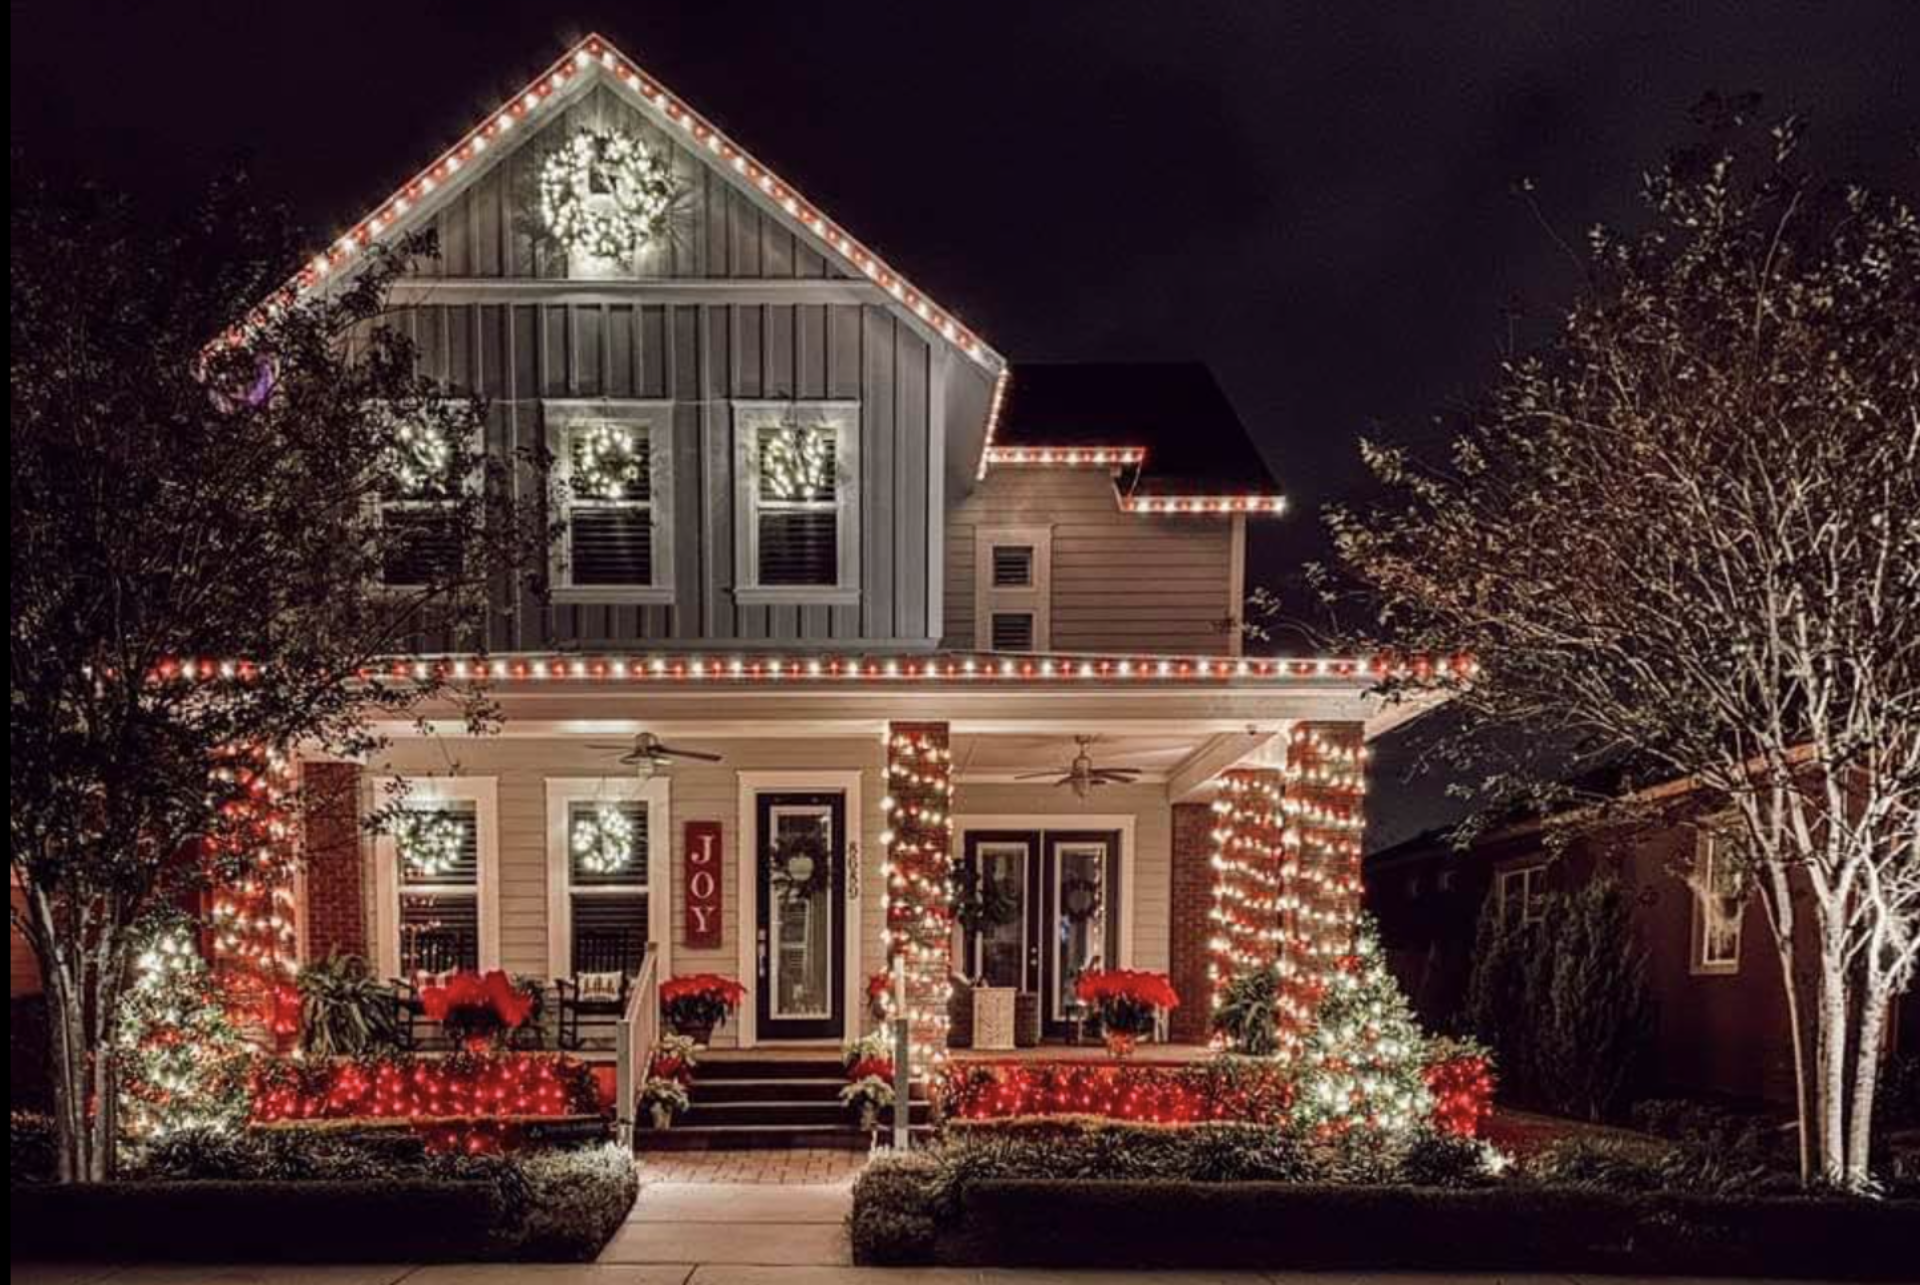 Frost Designs - The Magic of the Season!